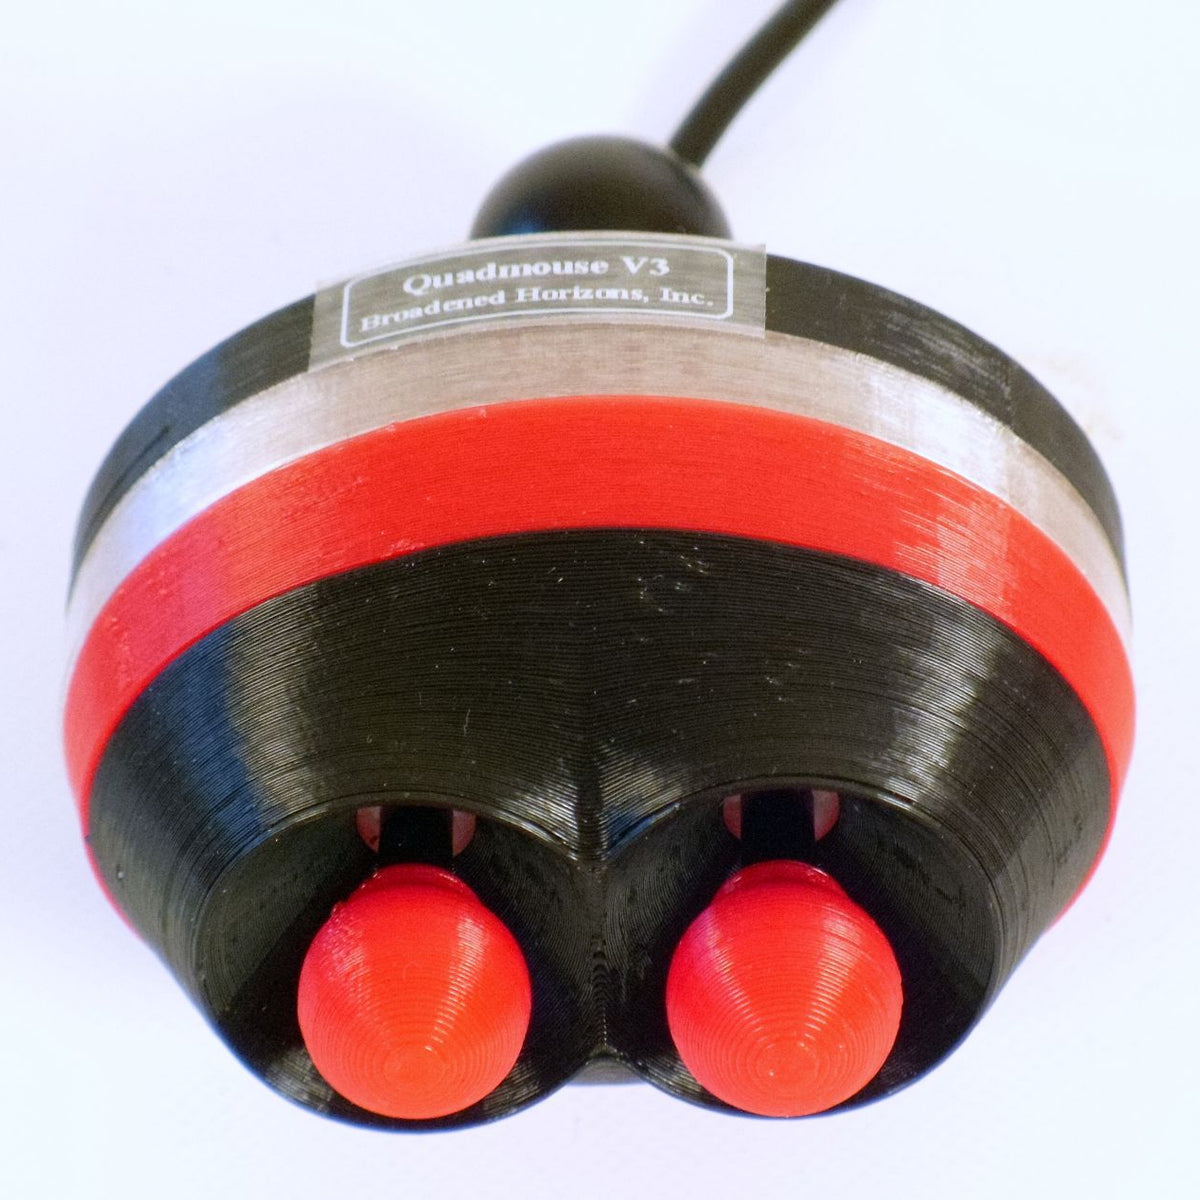 QuadMouse Mouth, Chin, or Fingertip Mouse Controller - Broadened Horizons Direct